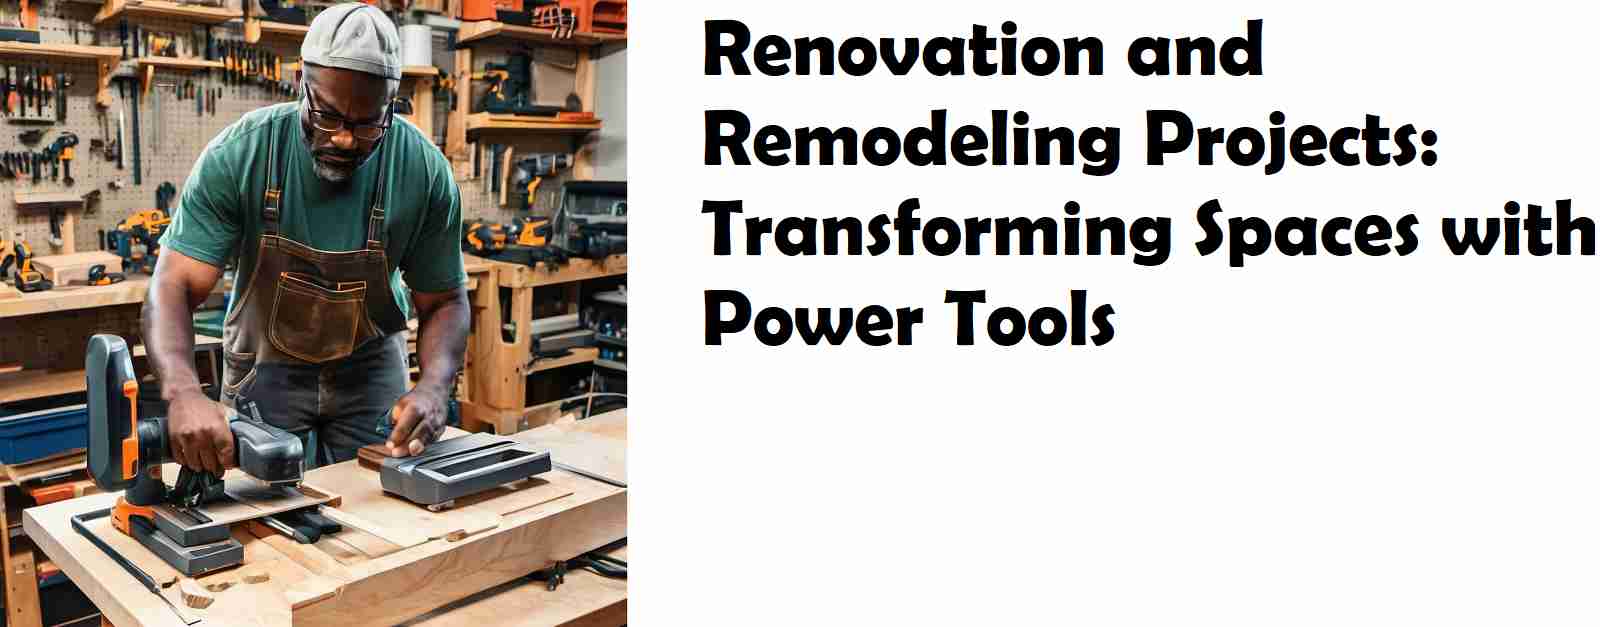 Renovation and Remodeling Projects with Power Tools